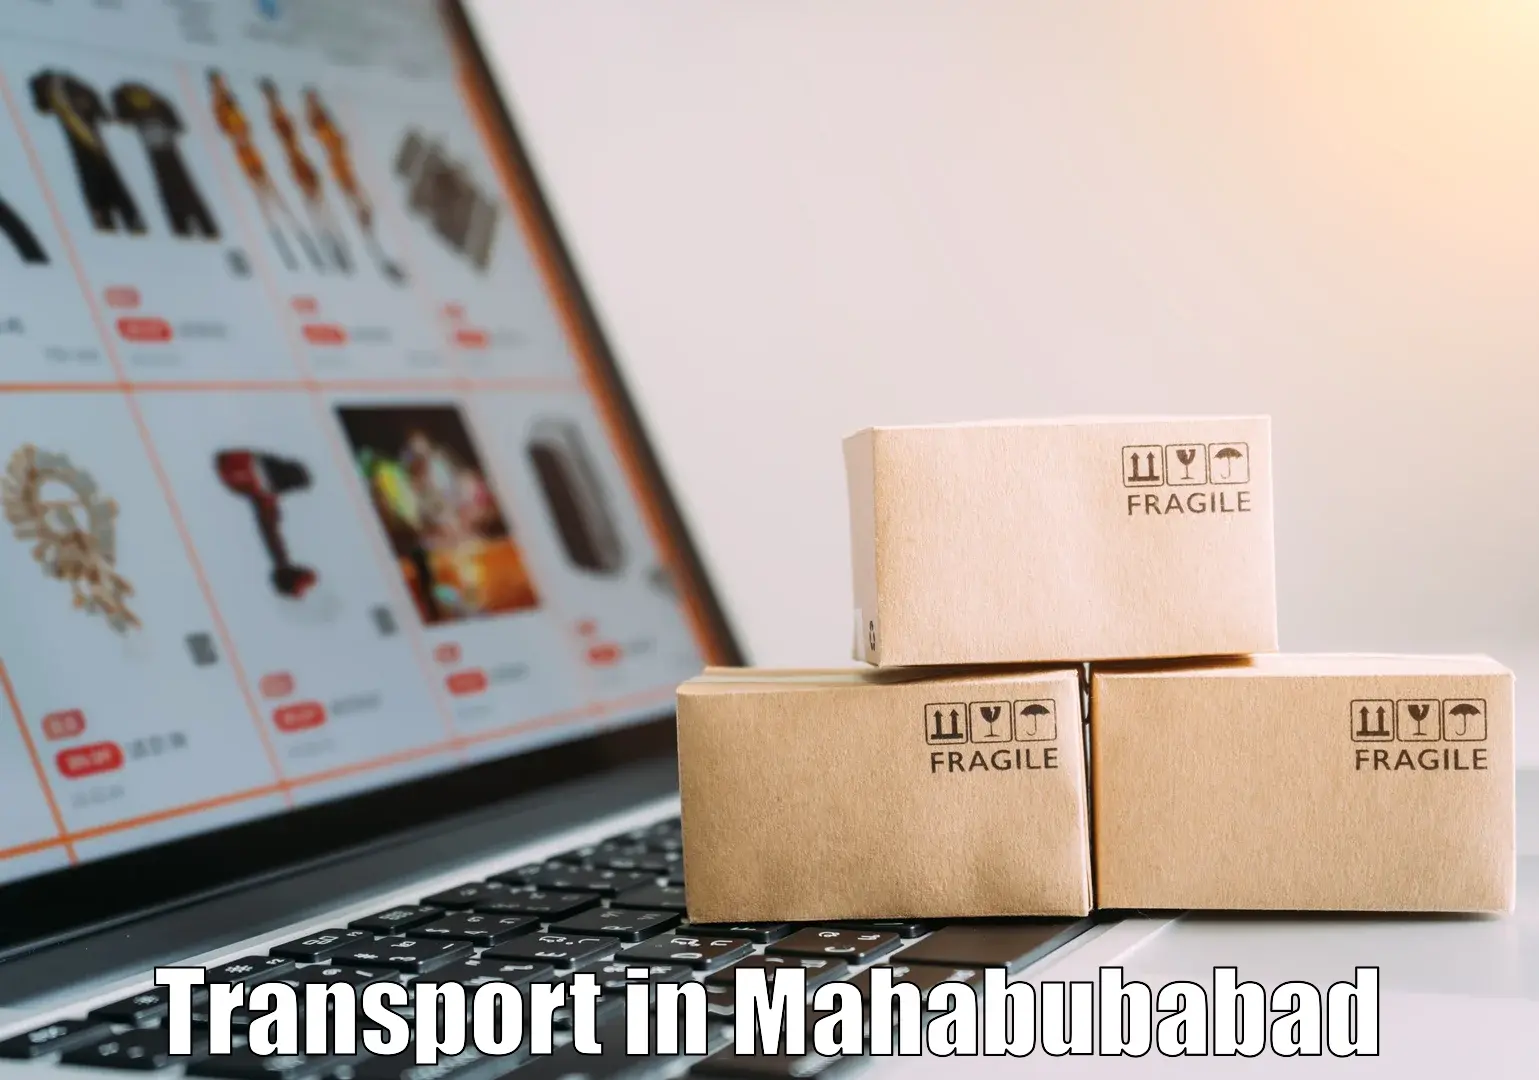 Interstate transport services in Mahabubabad